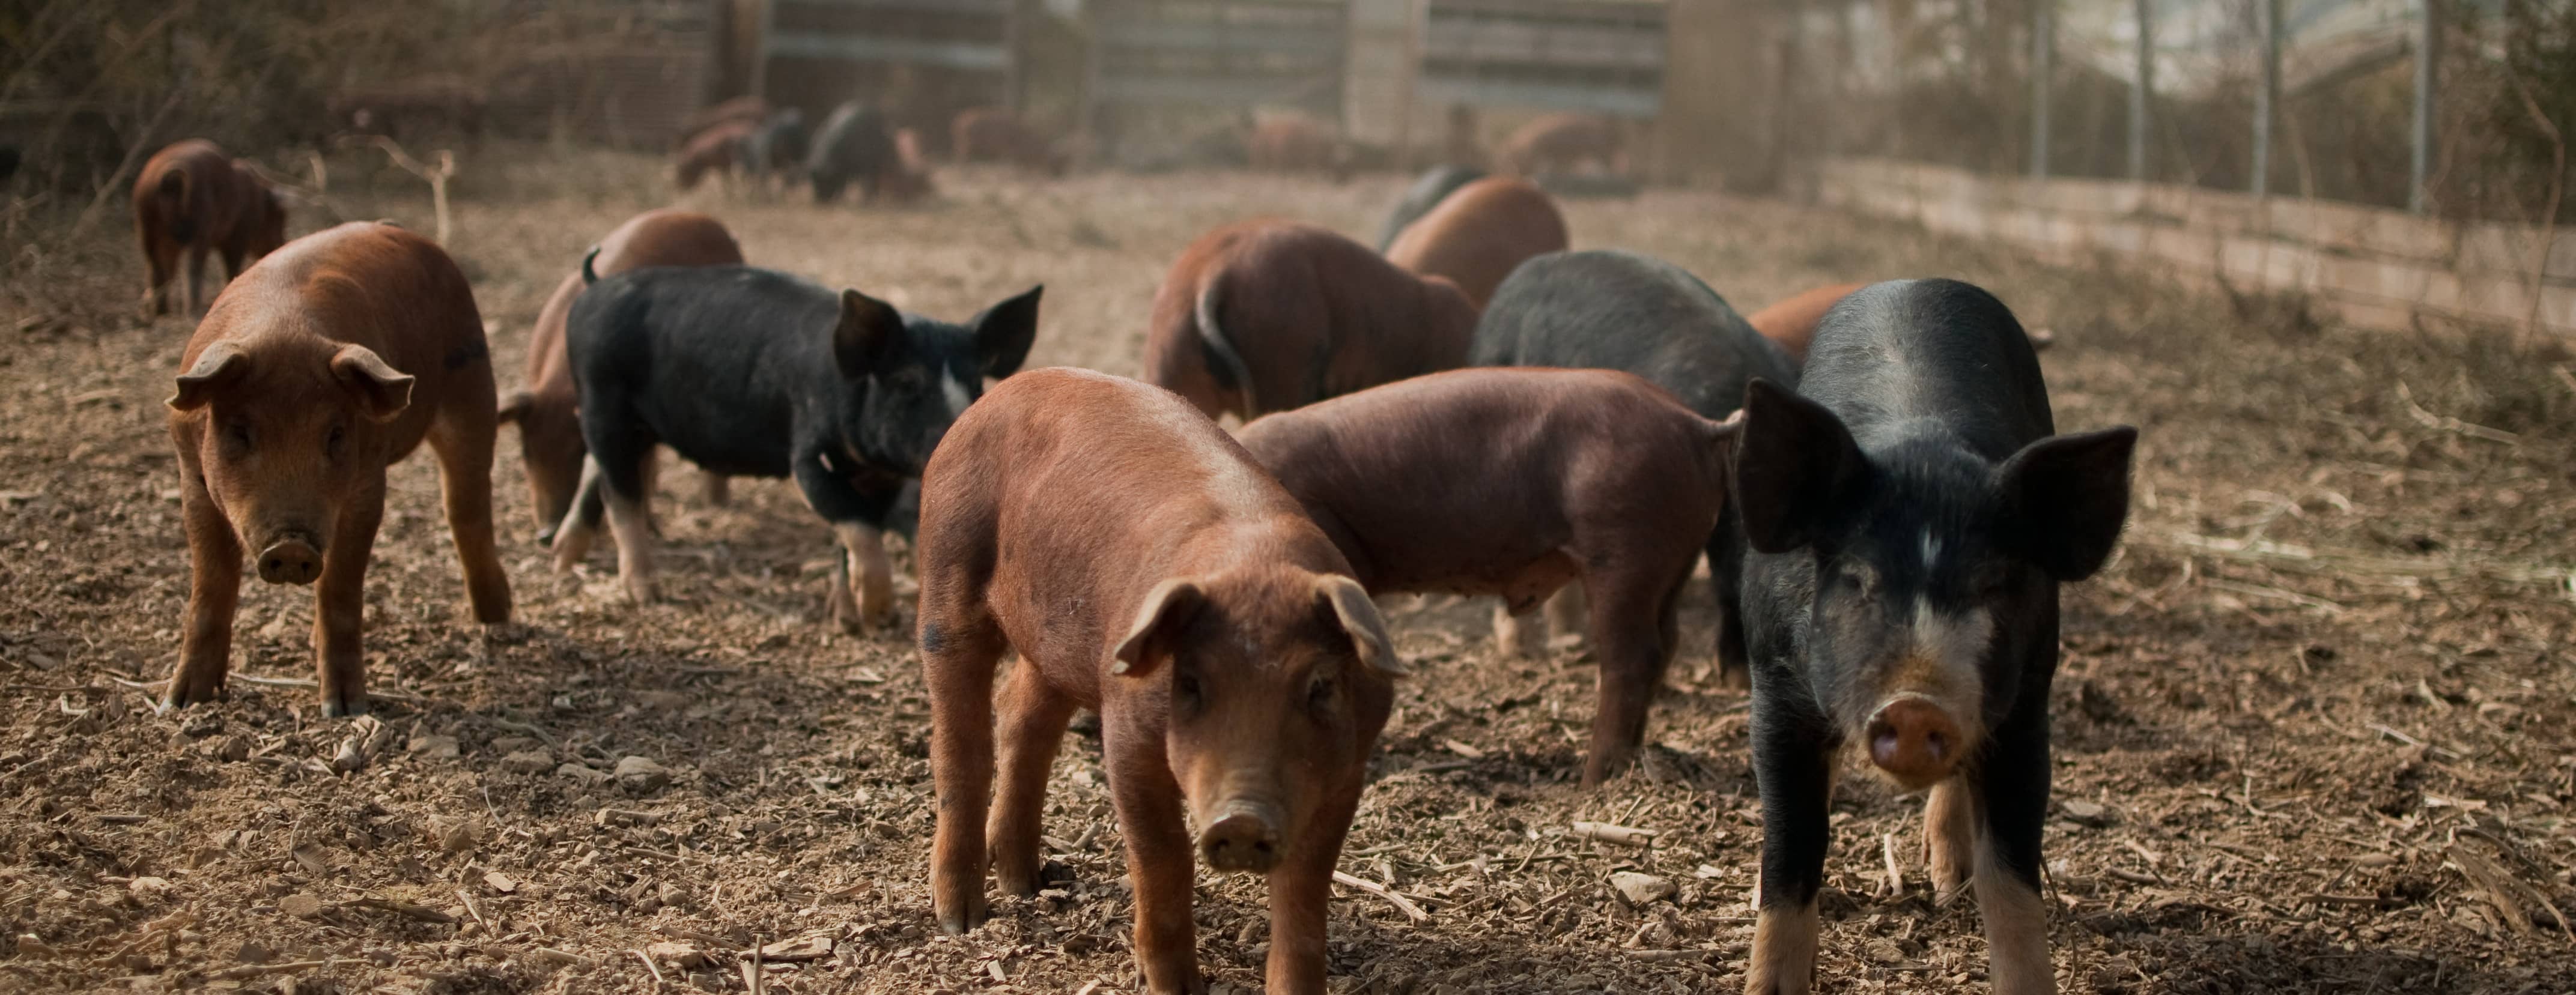 pigs_in_hoop_house_polyface_farm-cropped